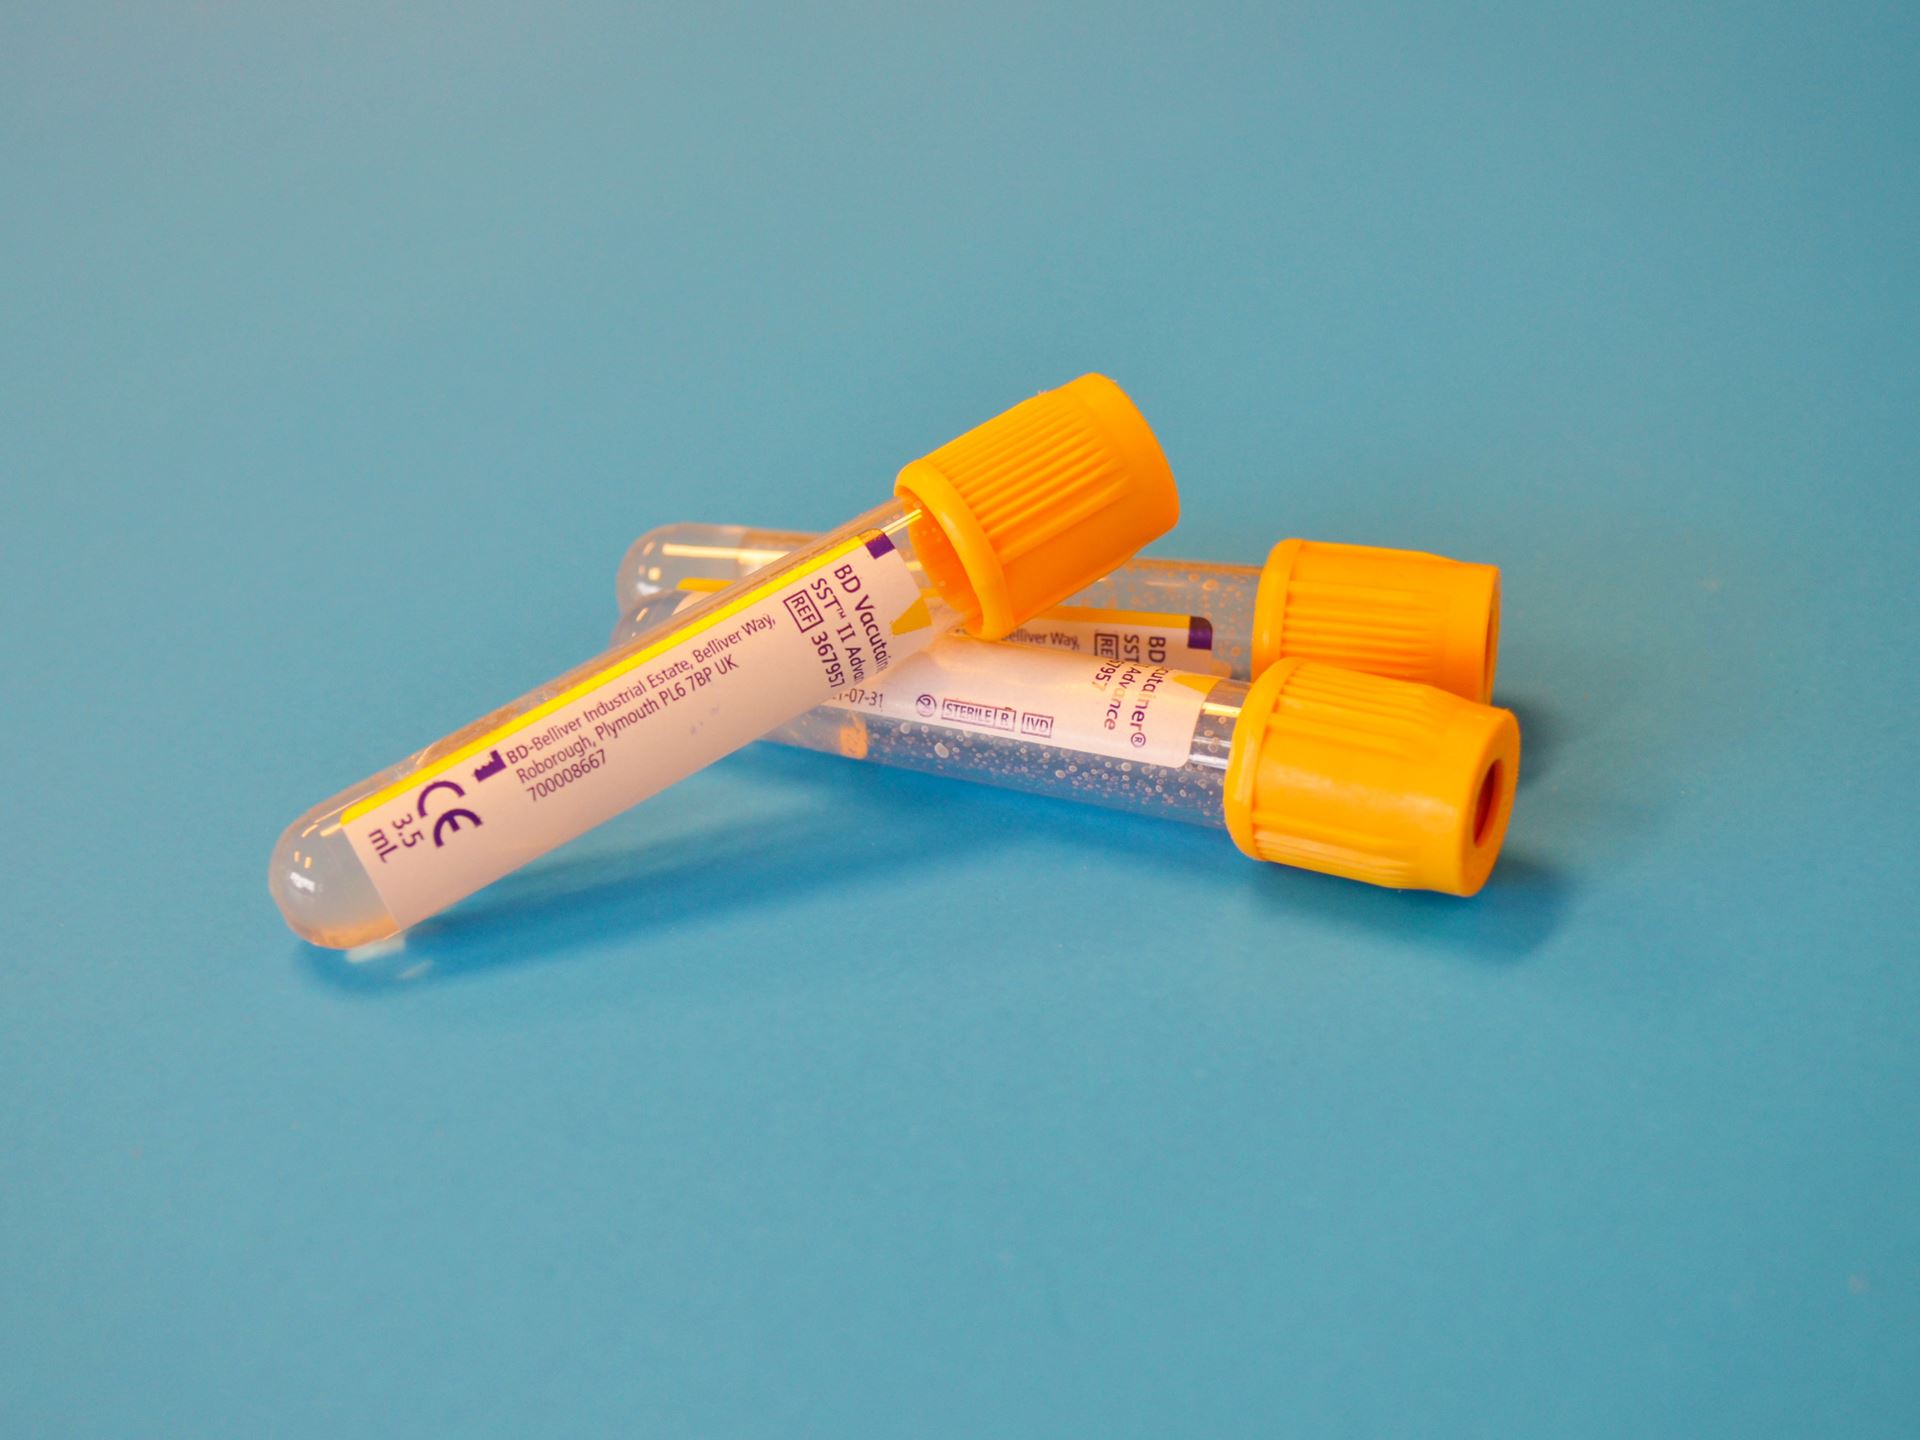 Three empty blood vials with yellow tops